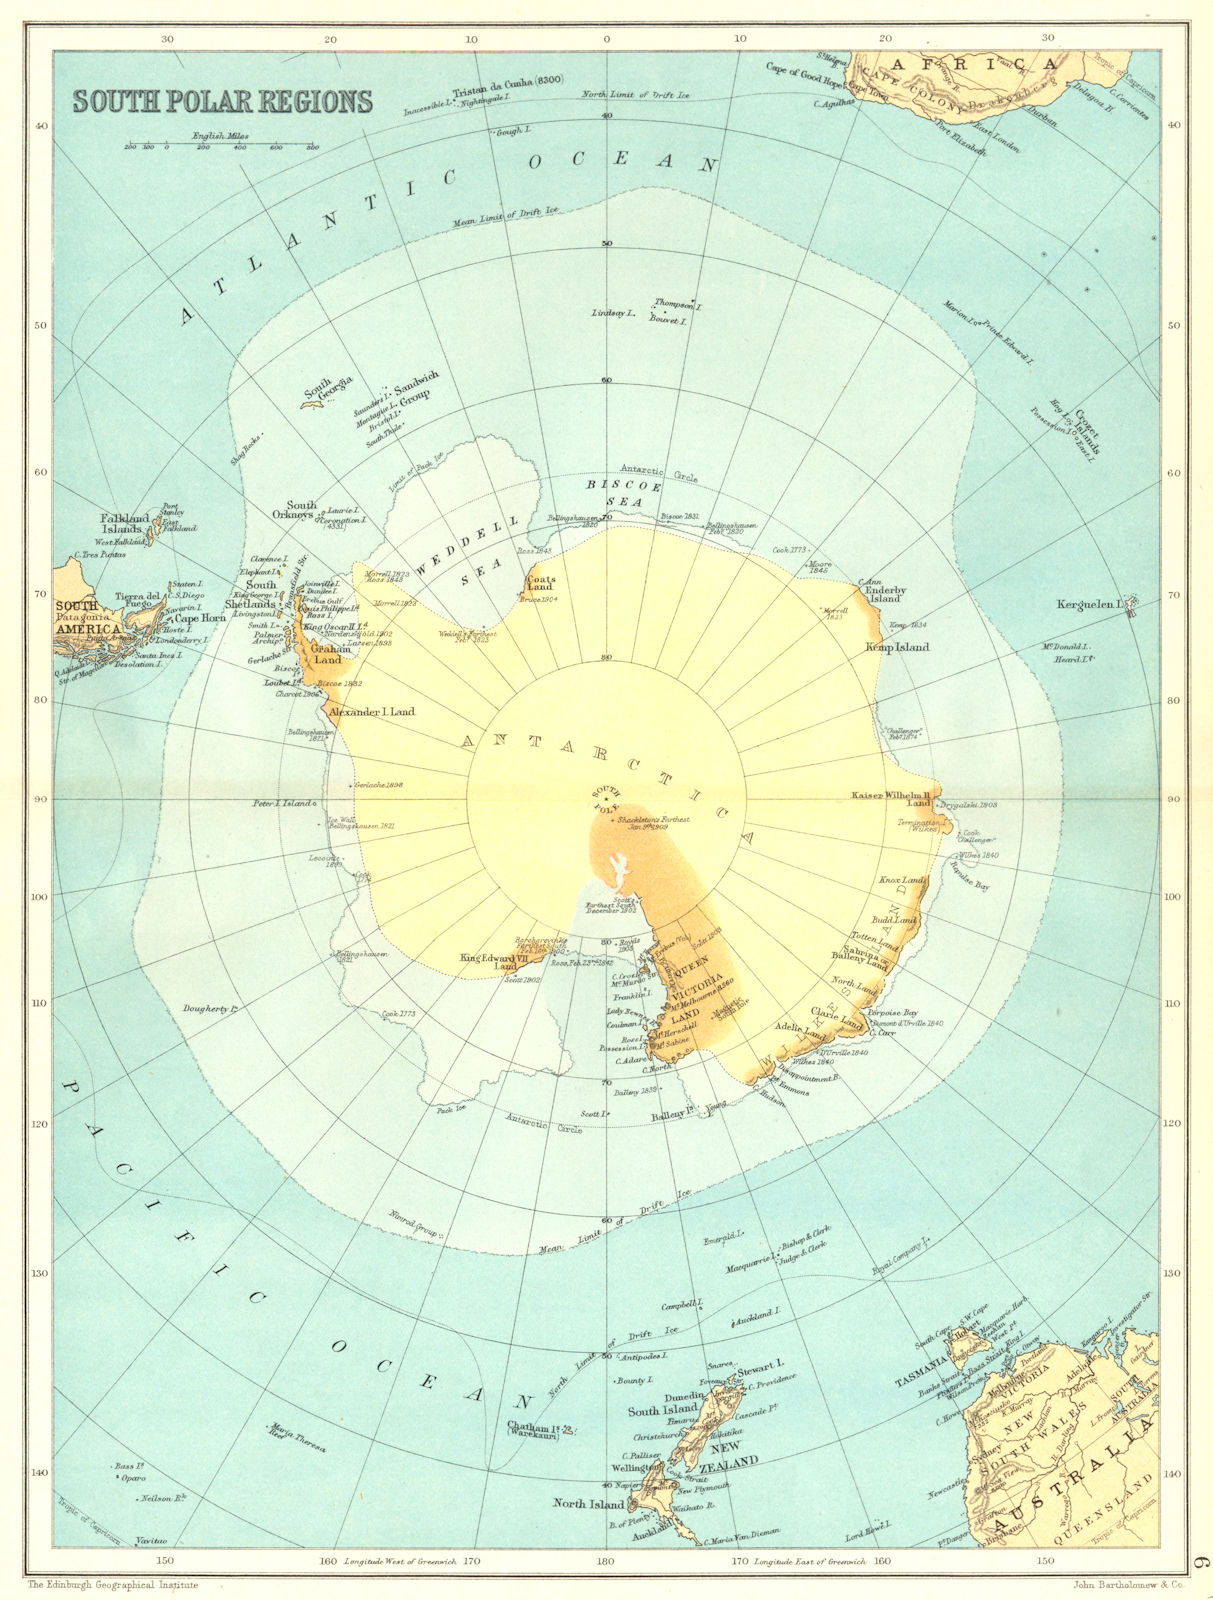 SOUTH POLE. Antarctic Ross Weddell  Royds Scott Shackleton approaches 1909 map